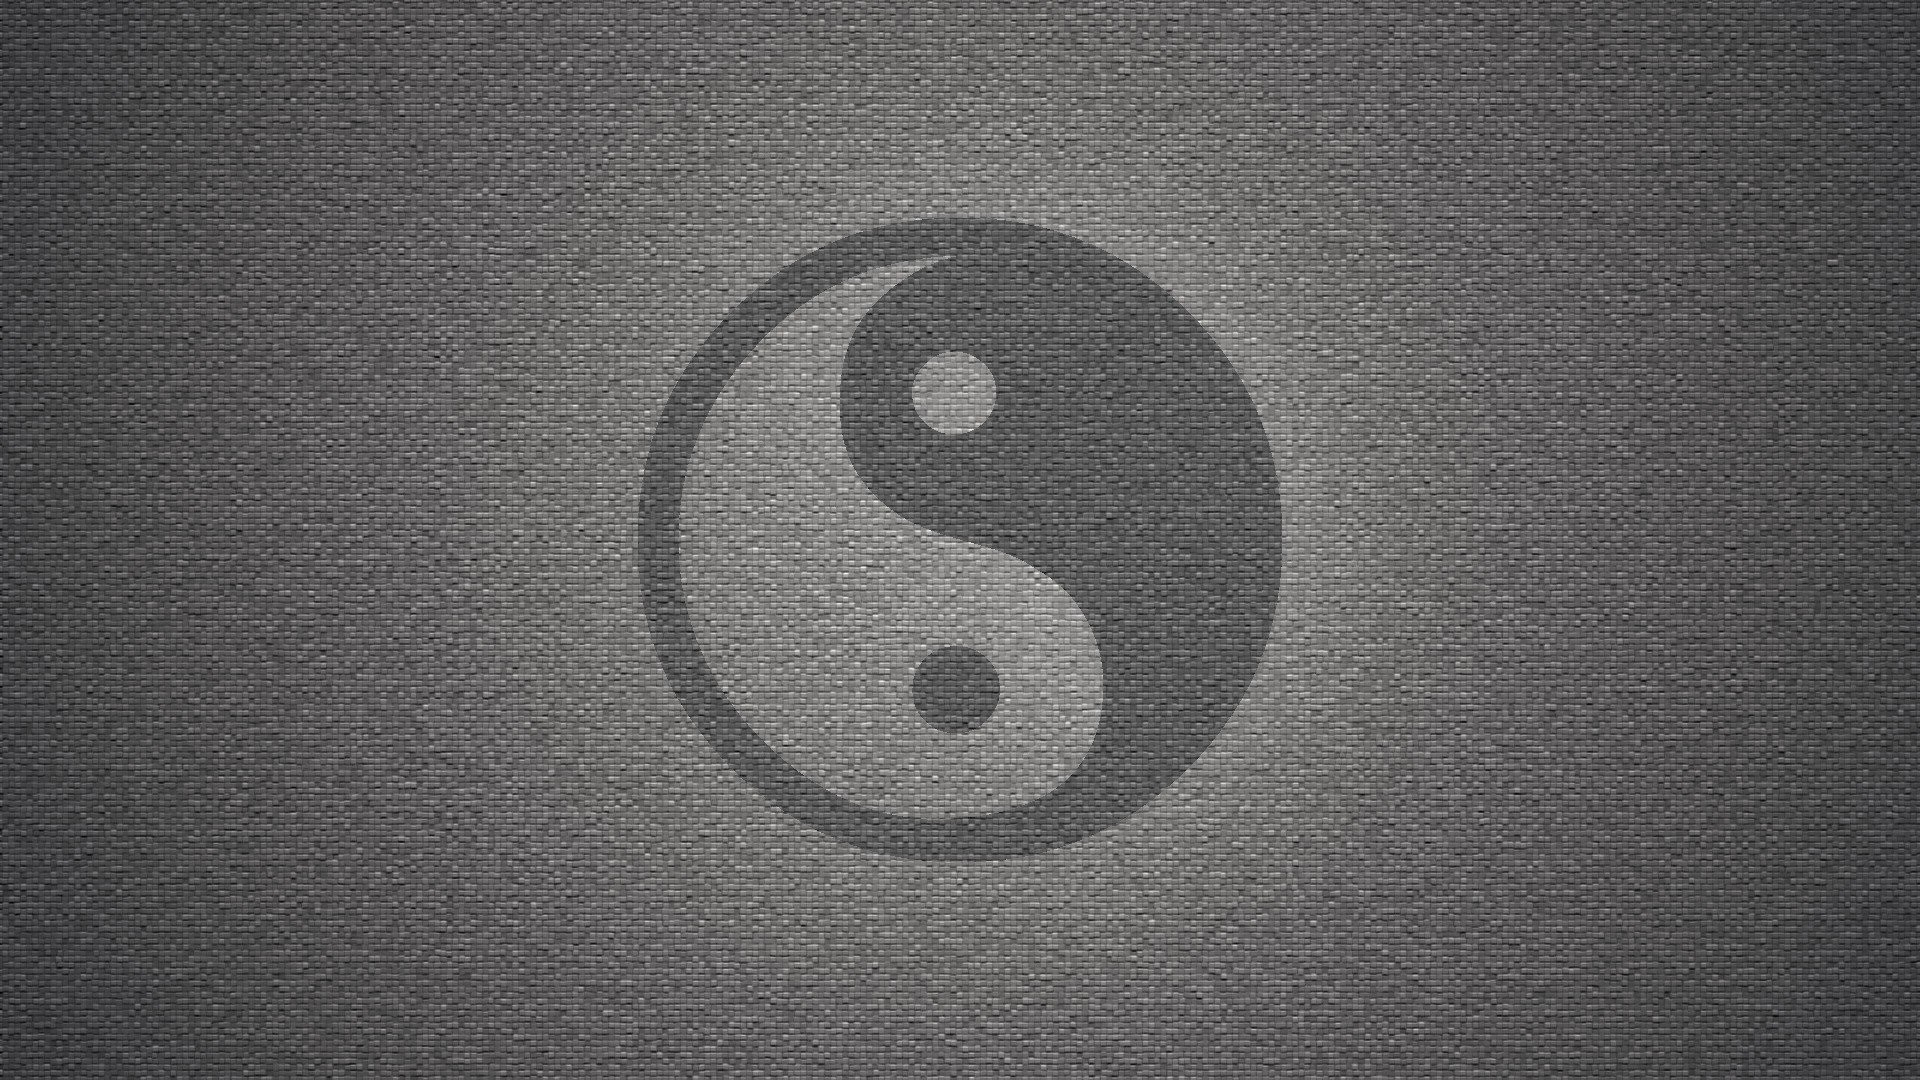 1920x1080 Wall yin yang symbol textures grayscale backgrounds symbols wallpaper |   | 288519 | WallpaperUP